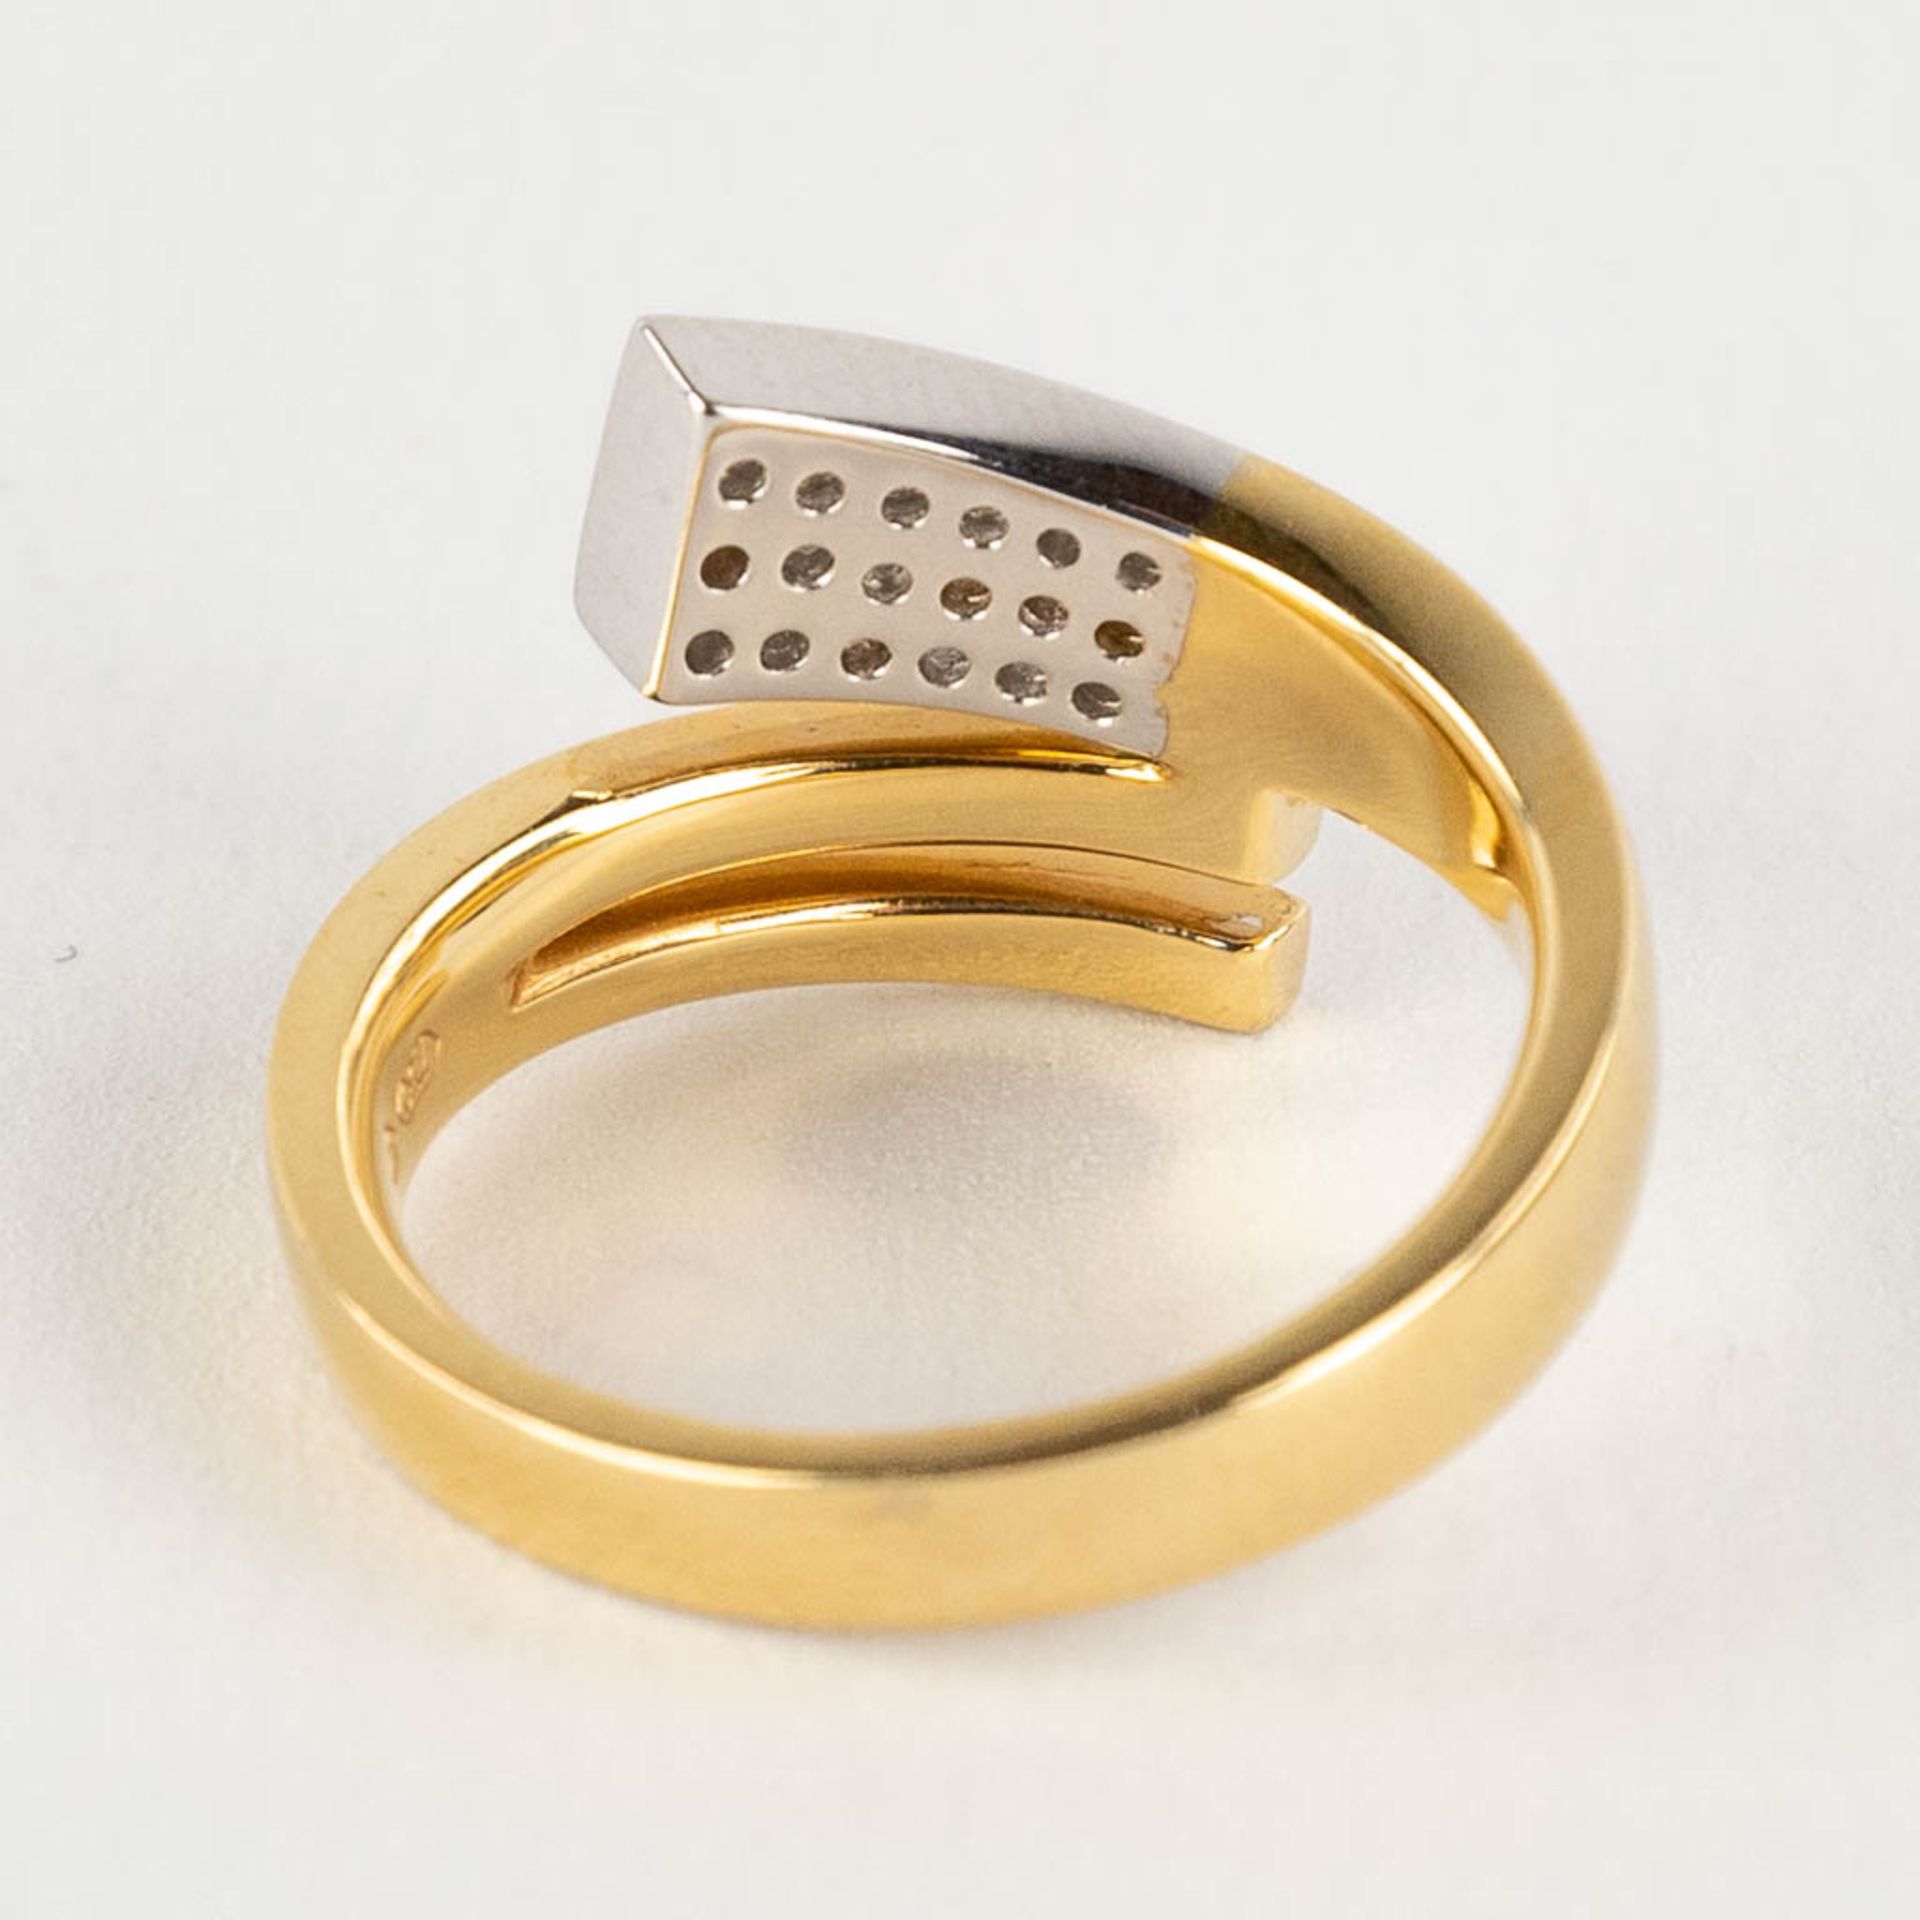 A ring, 18kt yellow gold with diamonds, appr. 0,42ct, ring size 55. - Image 6 of 11